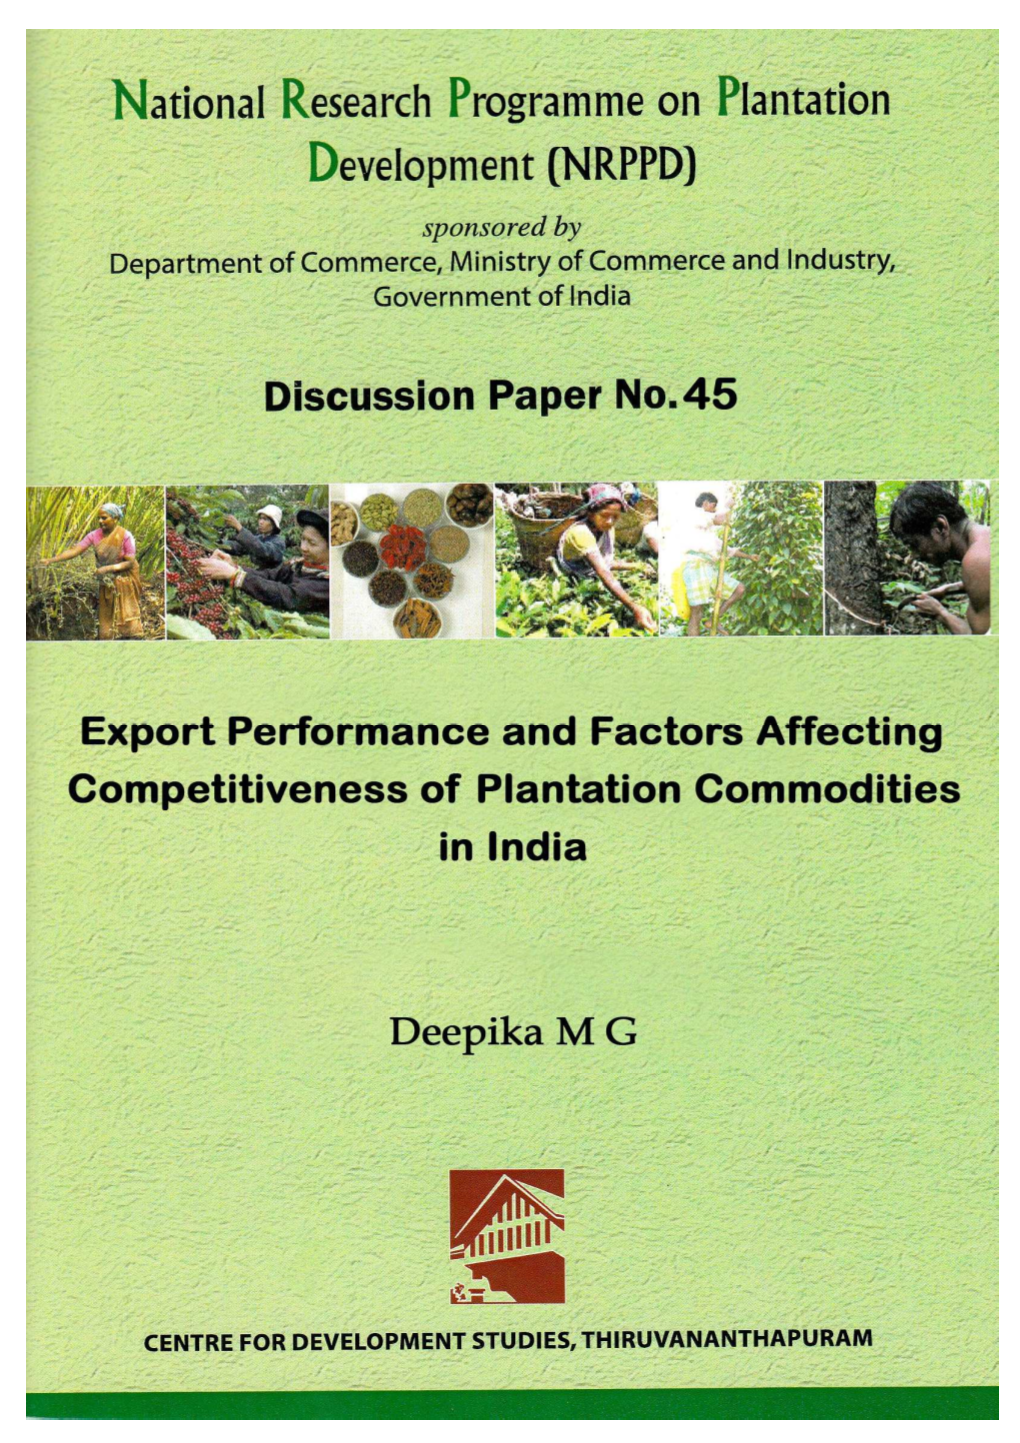 Export Performance and Factors Affecting Competitiveness of Plantation Commodities in India